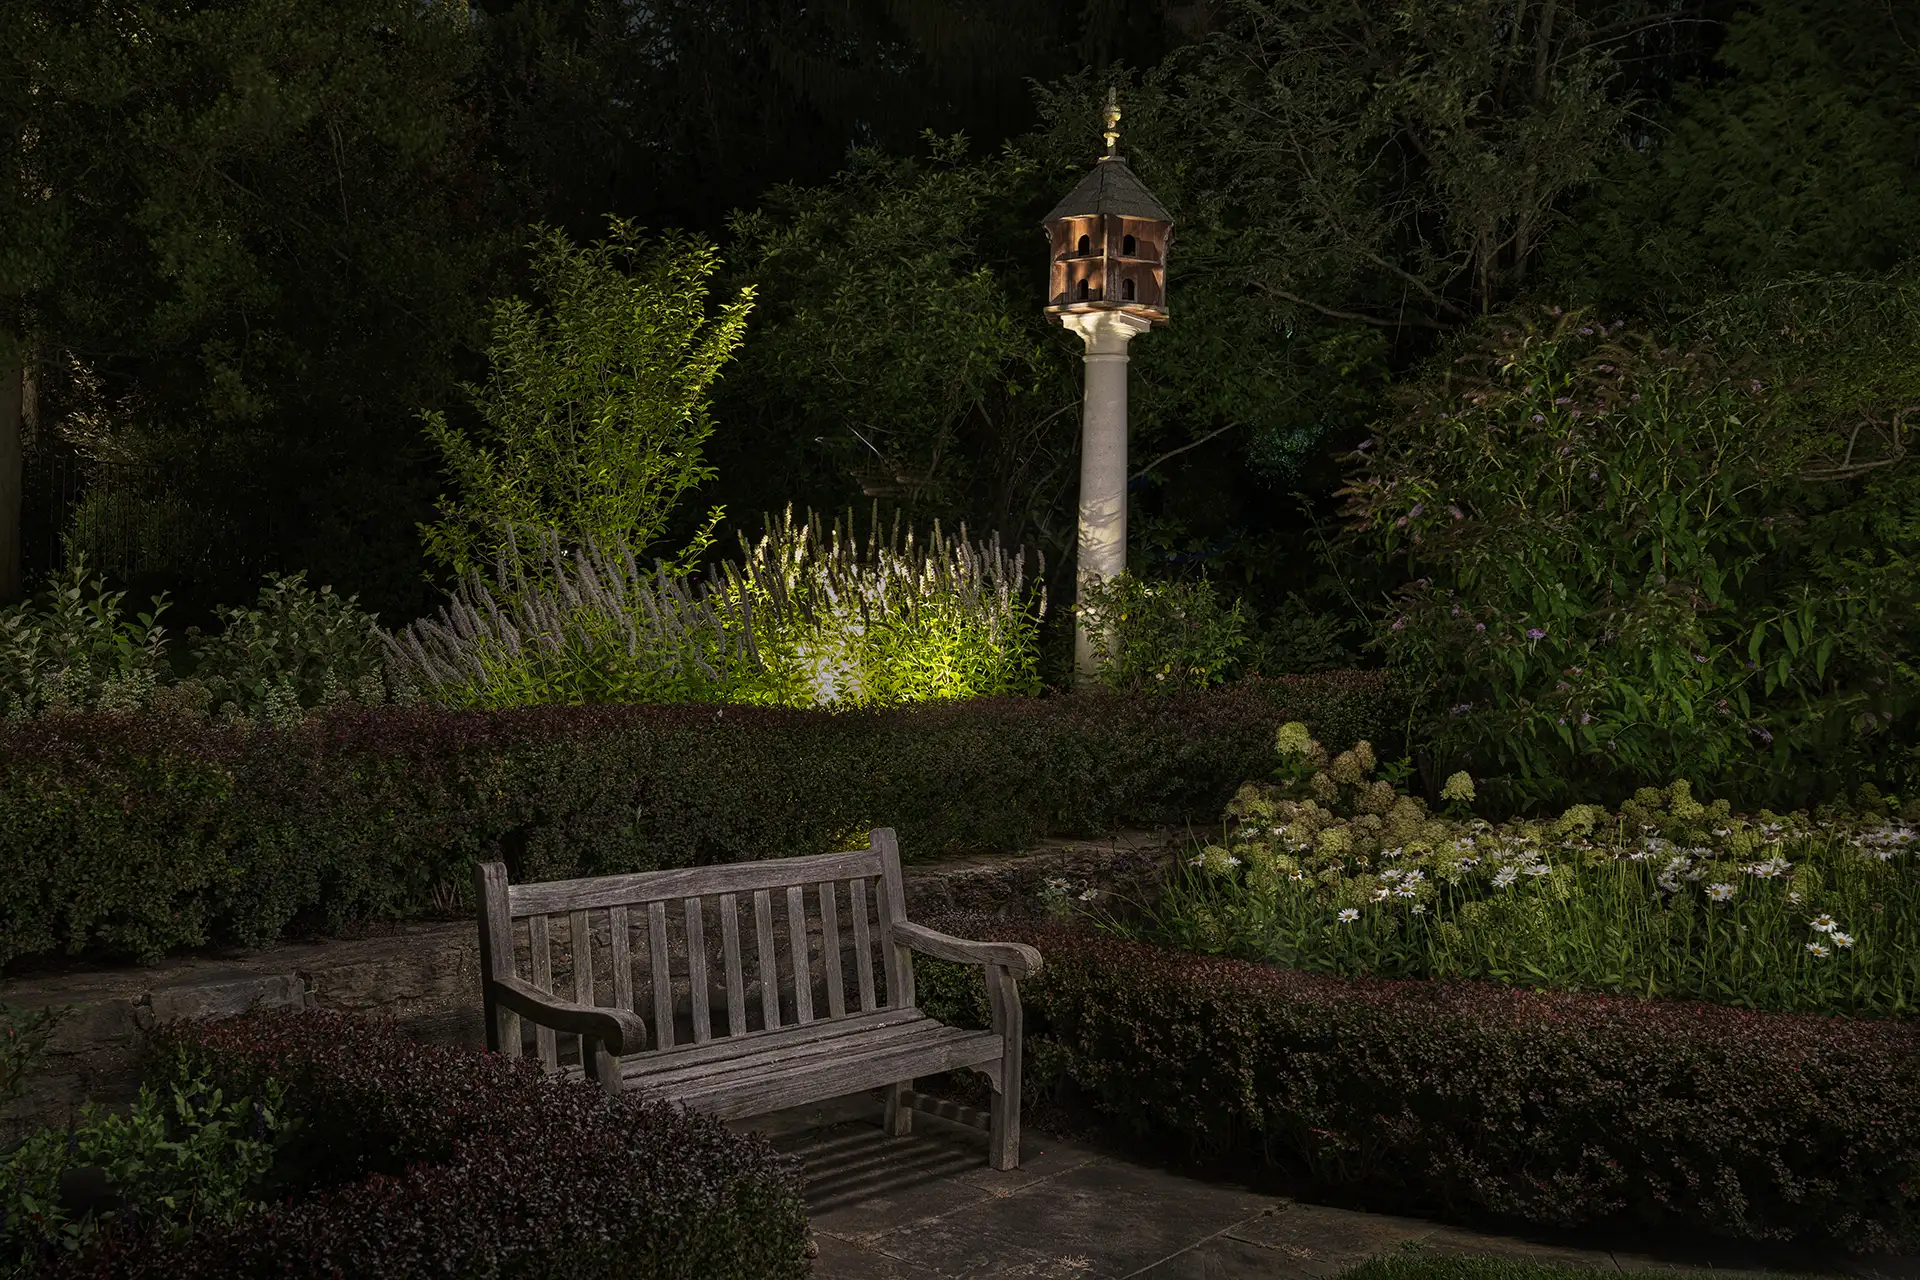 Main Line image 10 Lighthouse Outdoor Lighting and Audio West Chester PA